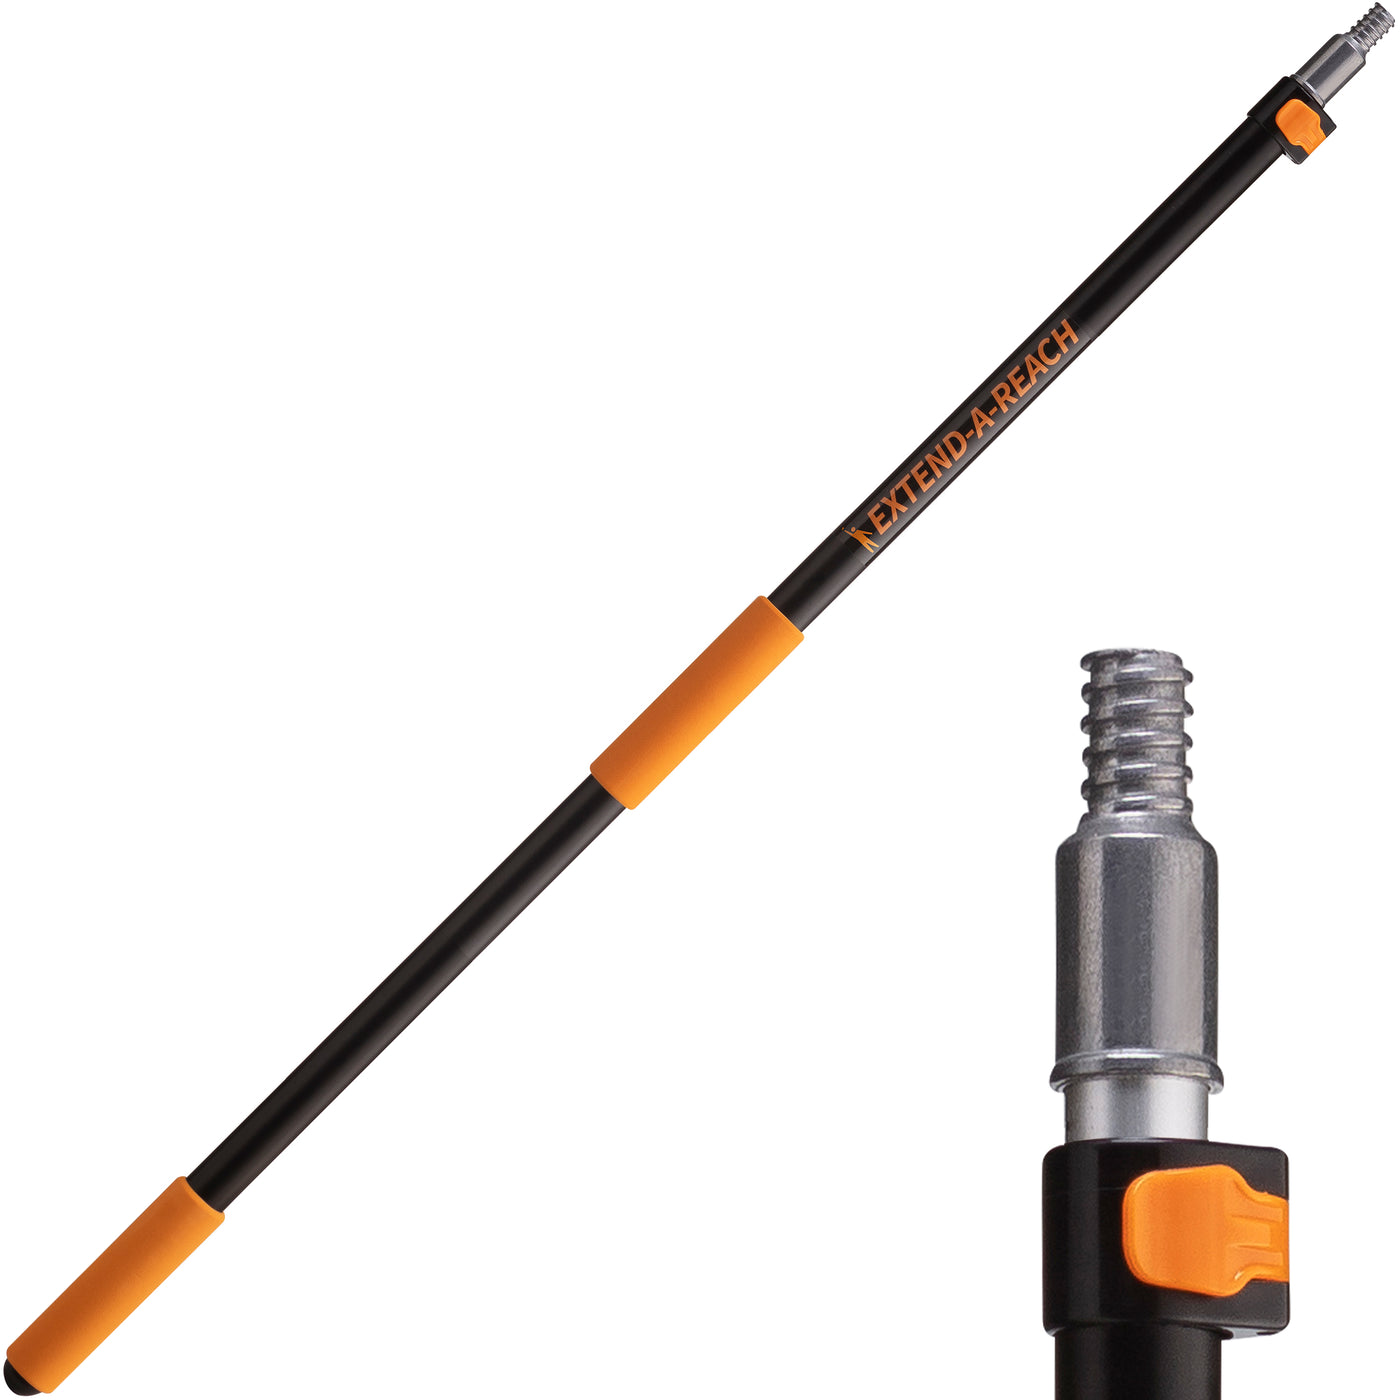 5-8 ft Long Telescopic Extension Pole with Universal Twist-on Metal Tip